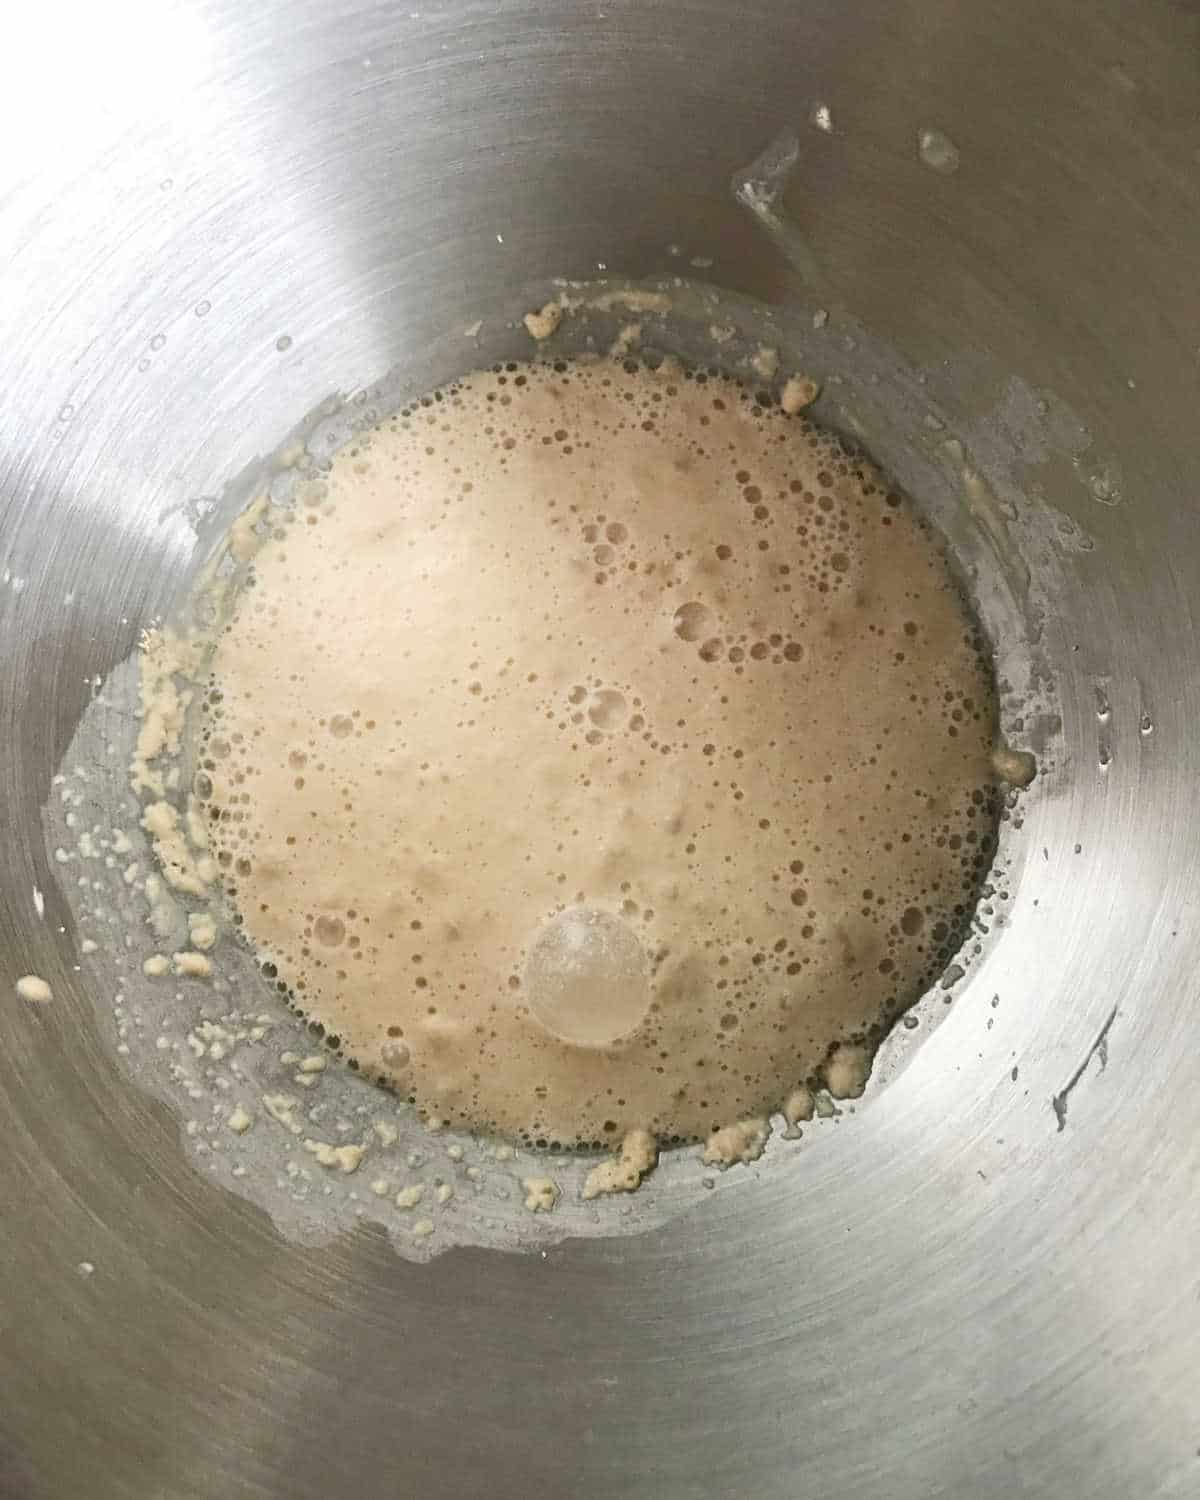 Yeast mixture foaming in a metal stand mixer pan. Close up image.